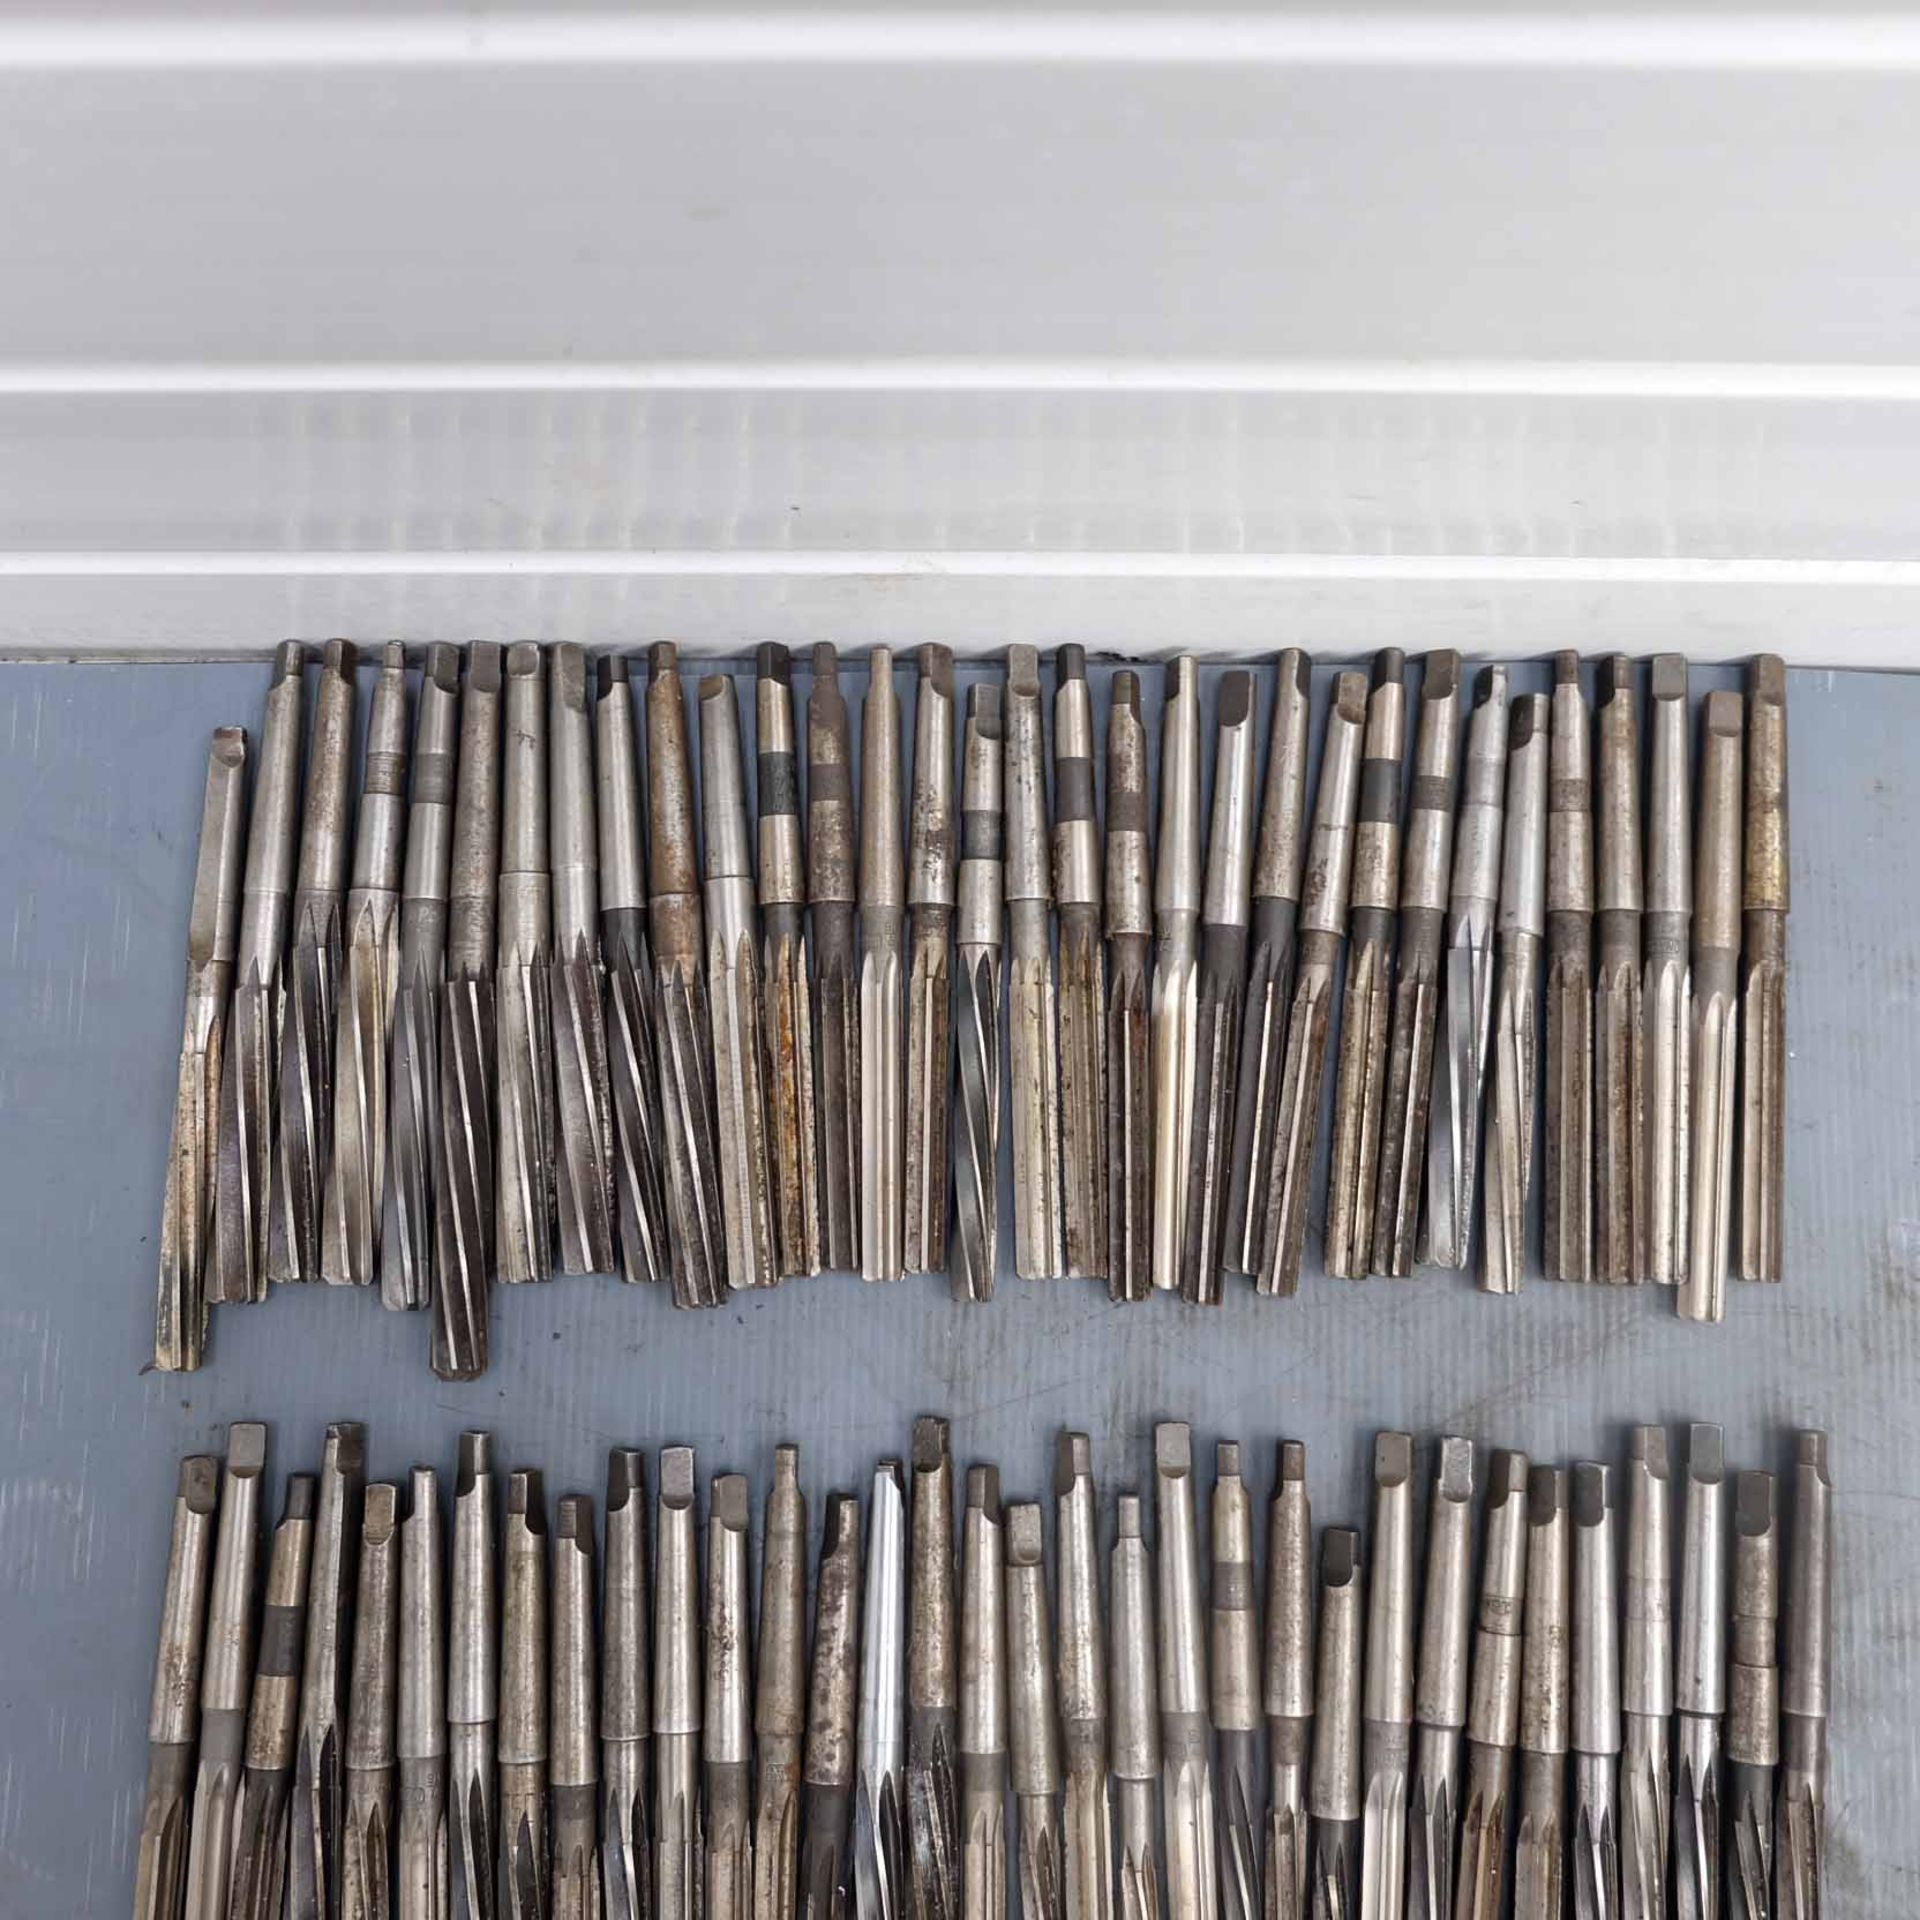 Quantity of Hand Reamers. Various Imperial Sizes. 1 Morse Taper. - Image 2 of 3